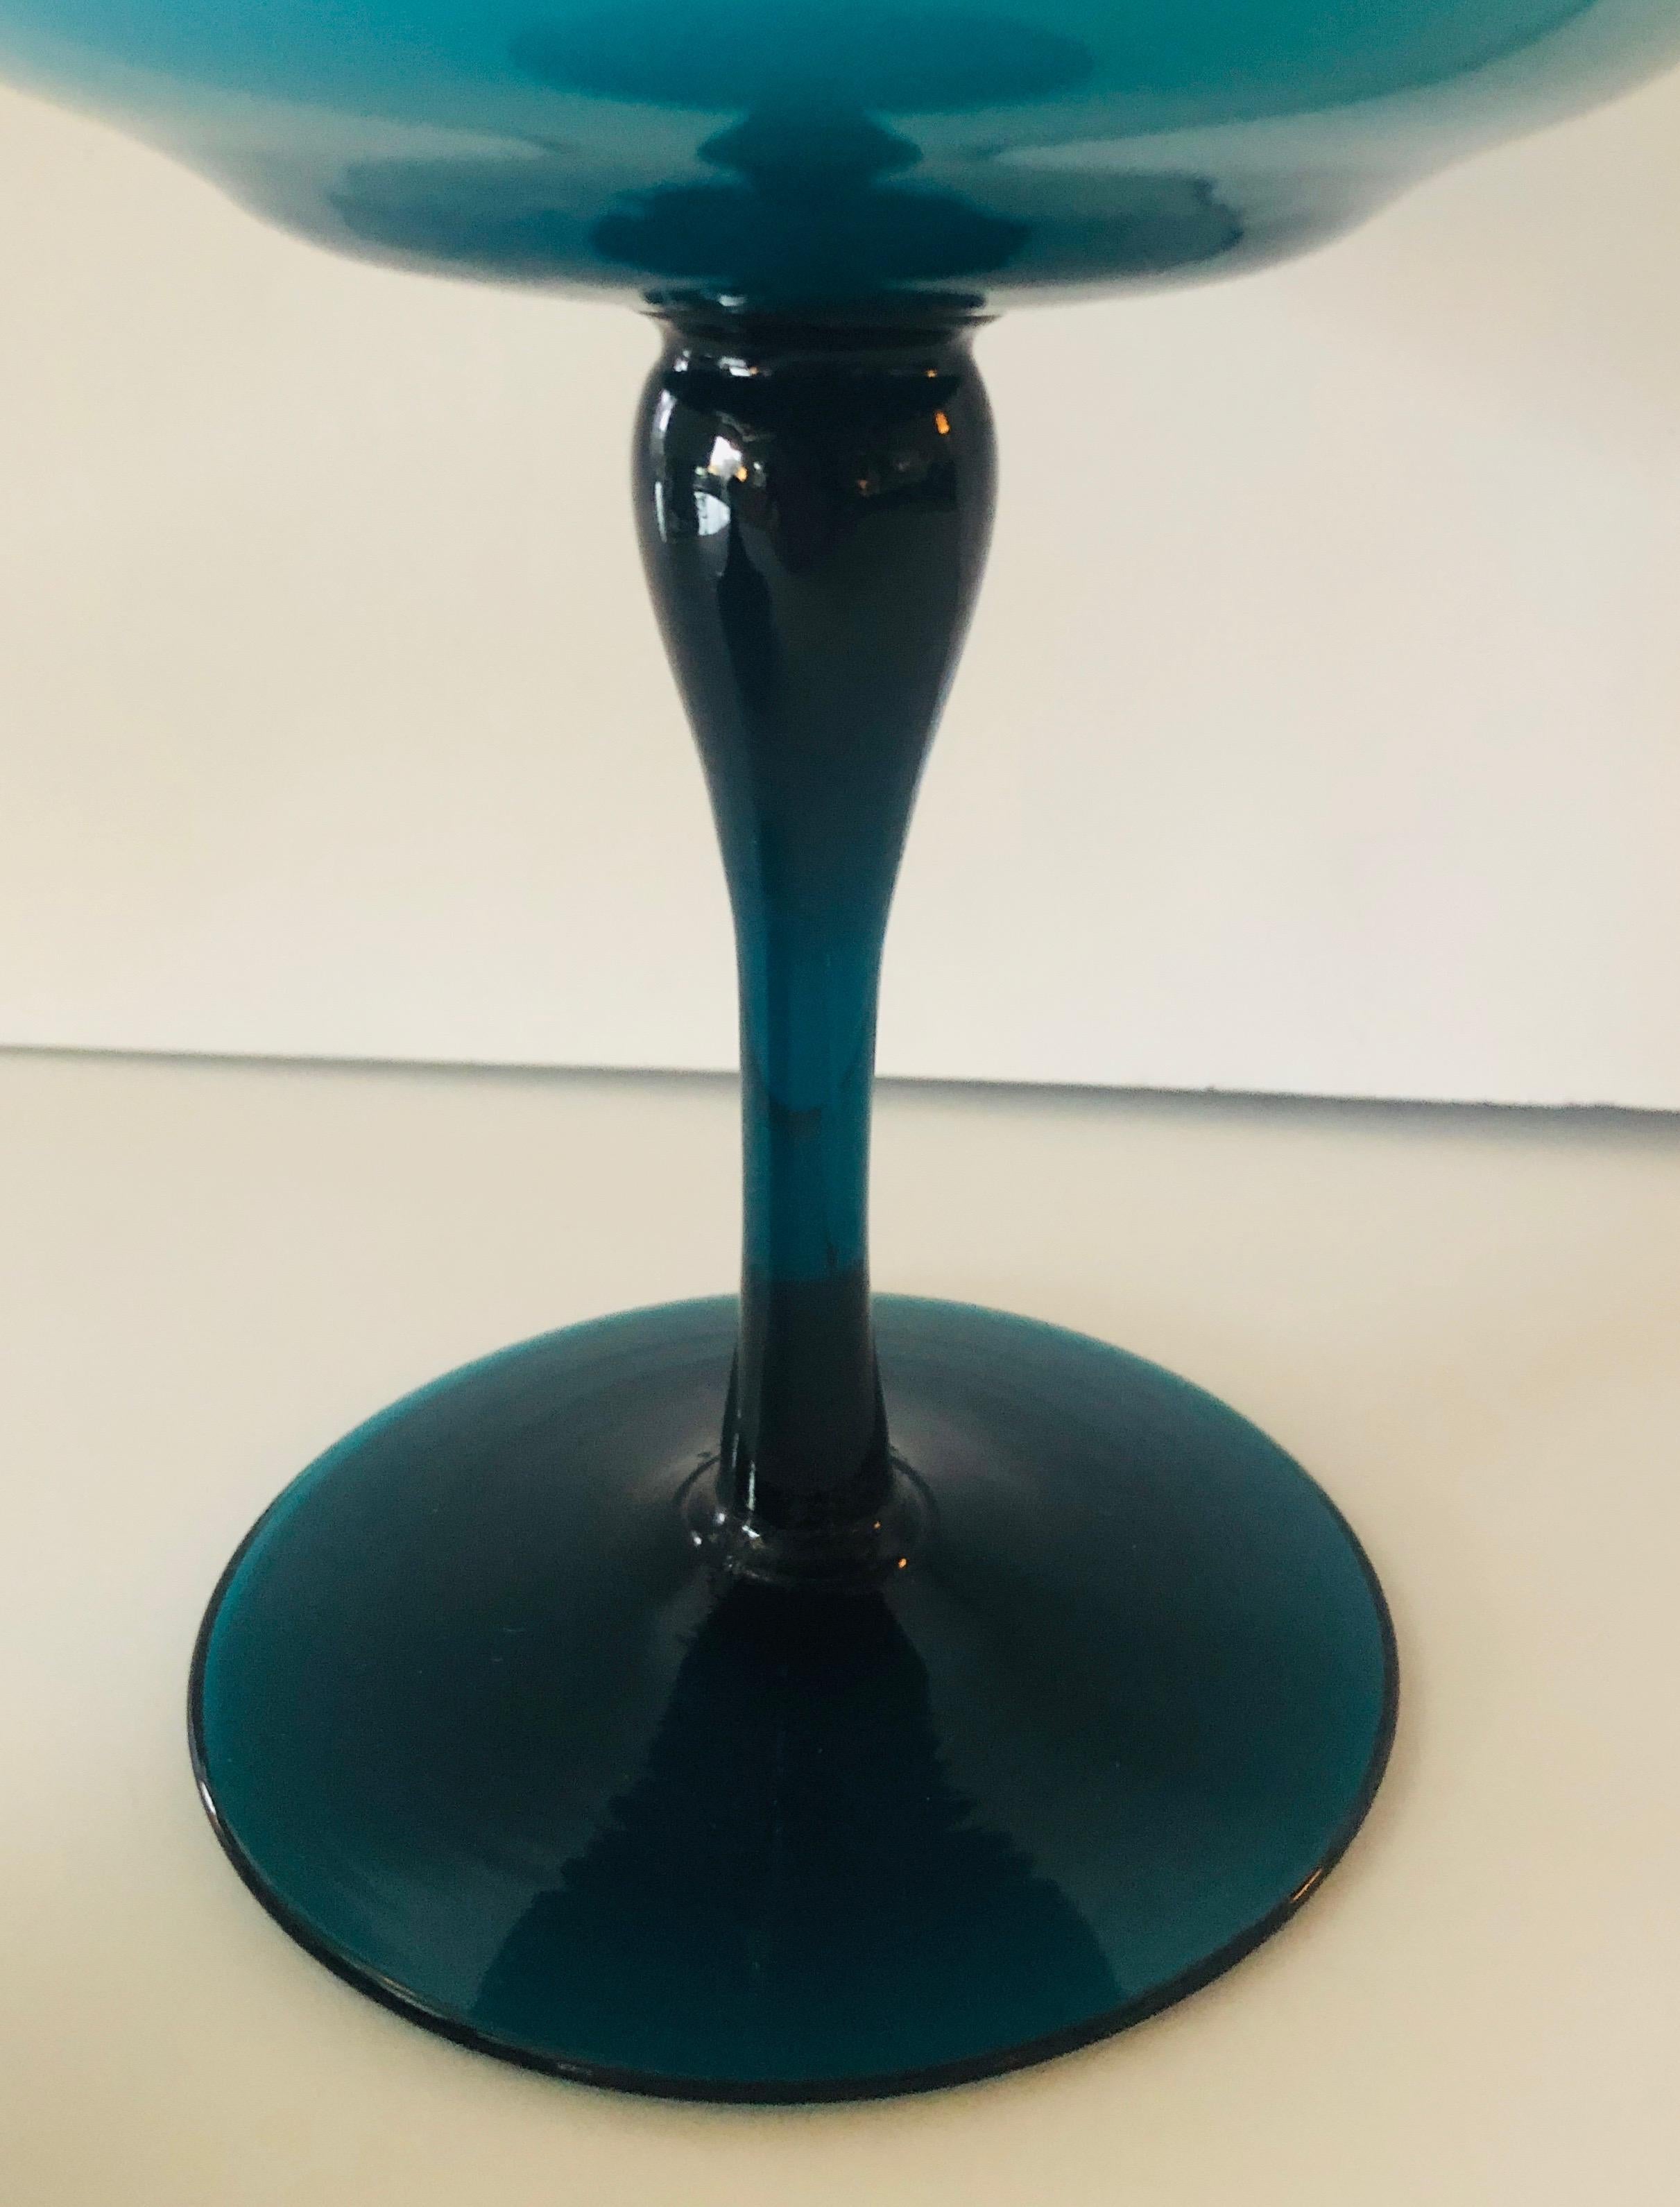 Offered is a Mid-Century Modern Italian turquoise blue Murano glass stemmed blown candy dish with decorative pom pom top lid. This is a beautiful example of Italian craftsmanship and of the hundreds year old tradition of Murano mouth blown glass in